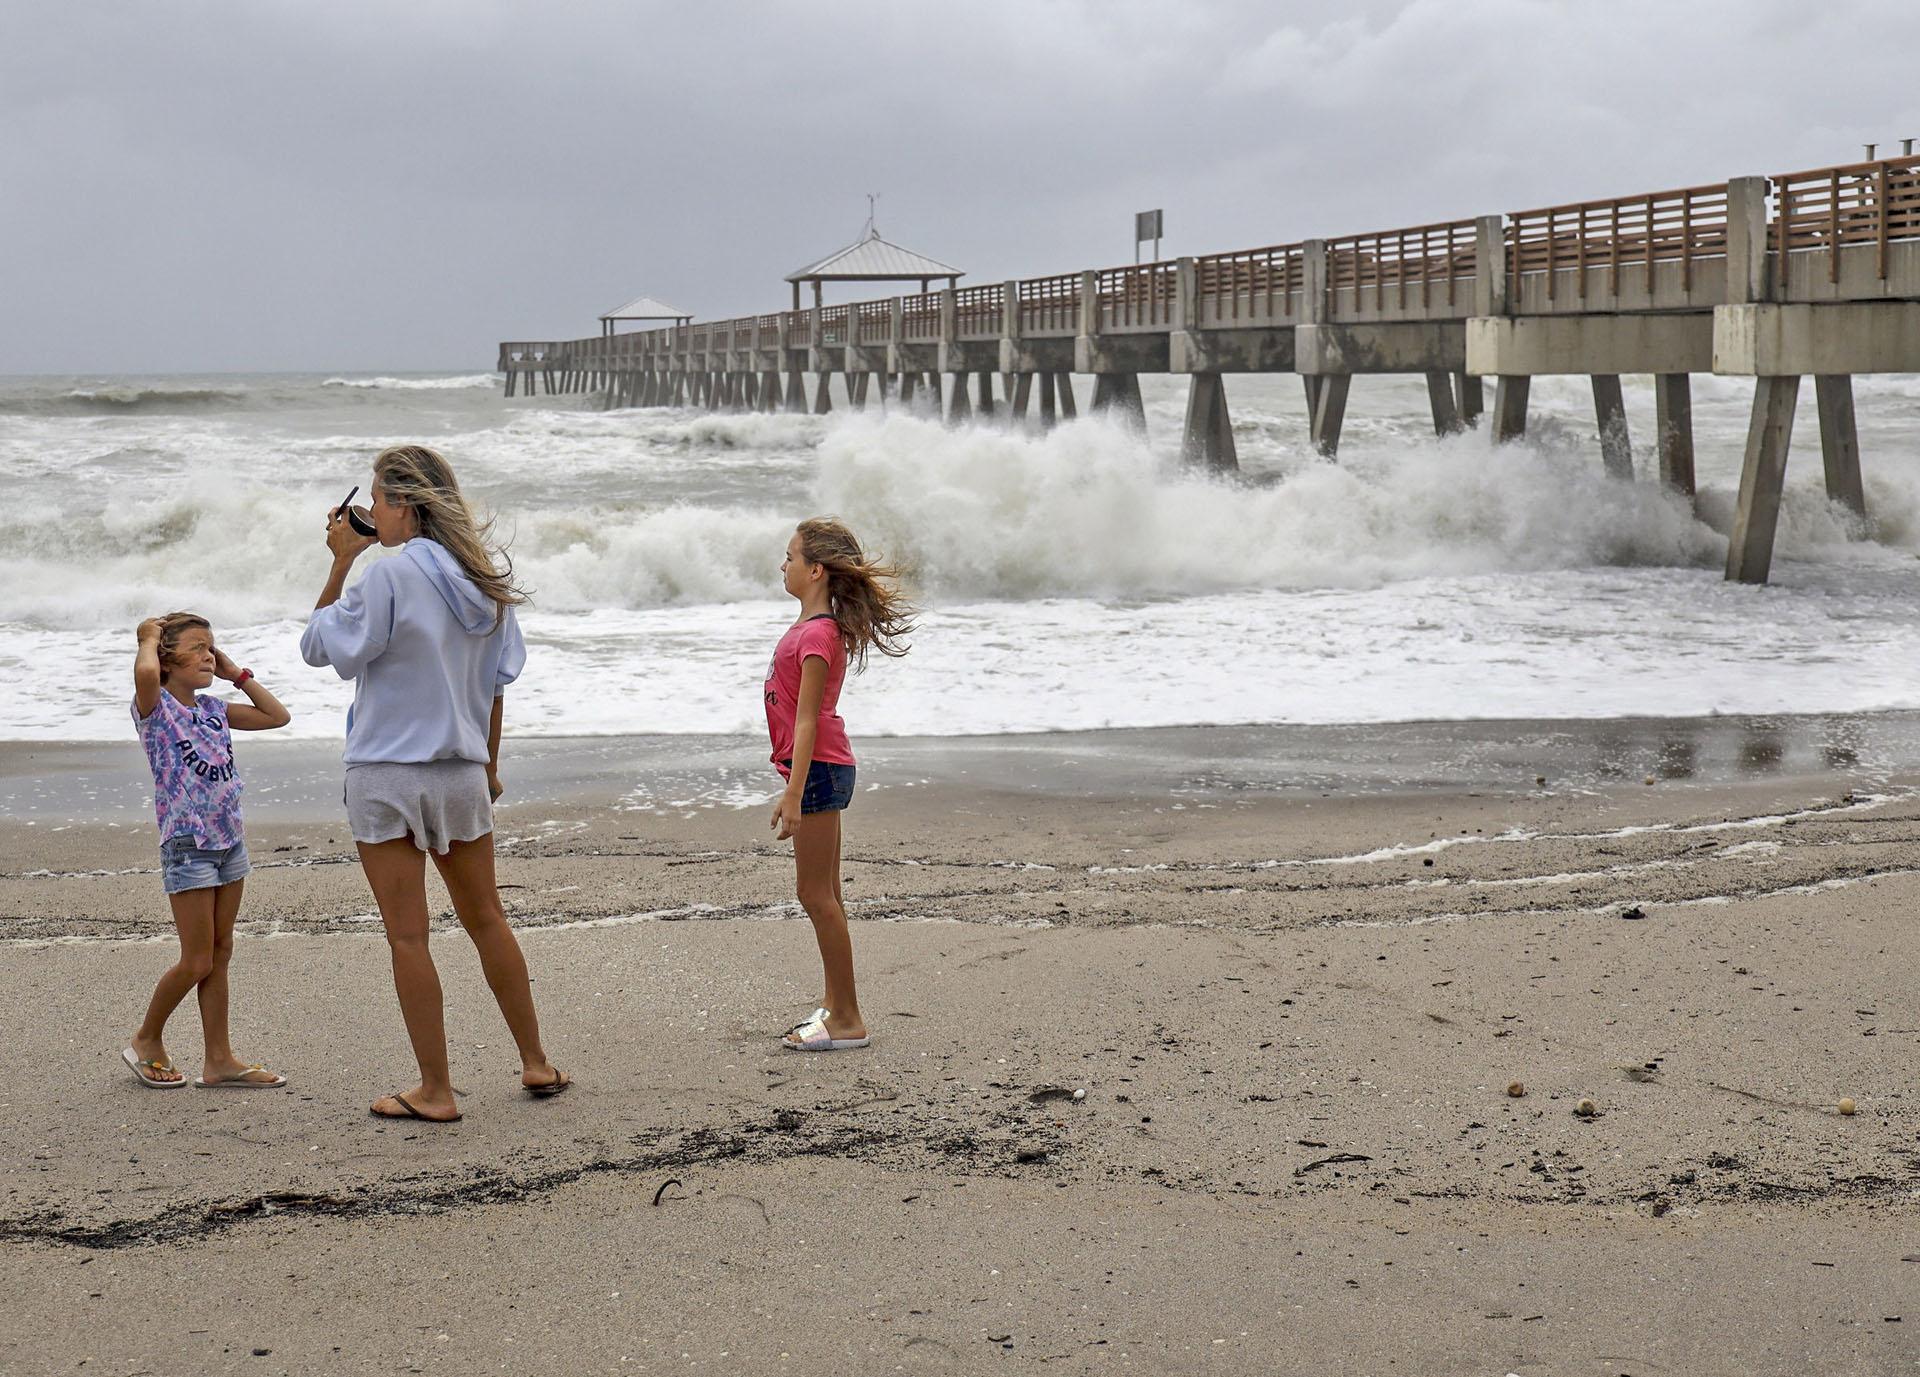 Juna Beach residents Anneka, 8, left, and sister, Breanna, 10, right, along with their mother, Leah Hanza, center, get a close look of the waves crashing against the Juno Beach Pier as Hurricane Dorian crawls toward Florida, and it continues to ravage the Bahamas on Monday, Sept. 2, 2019. (Carl Juste/Miami Herald via AP)